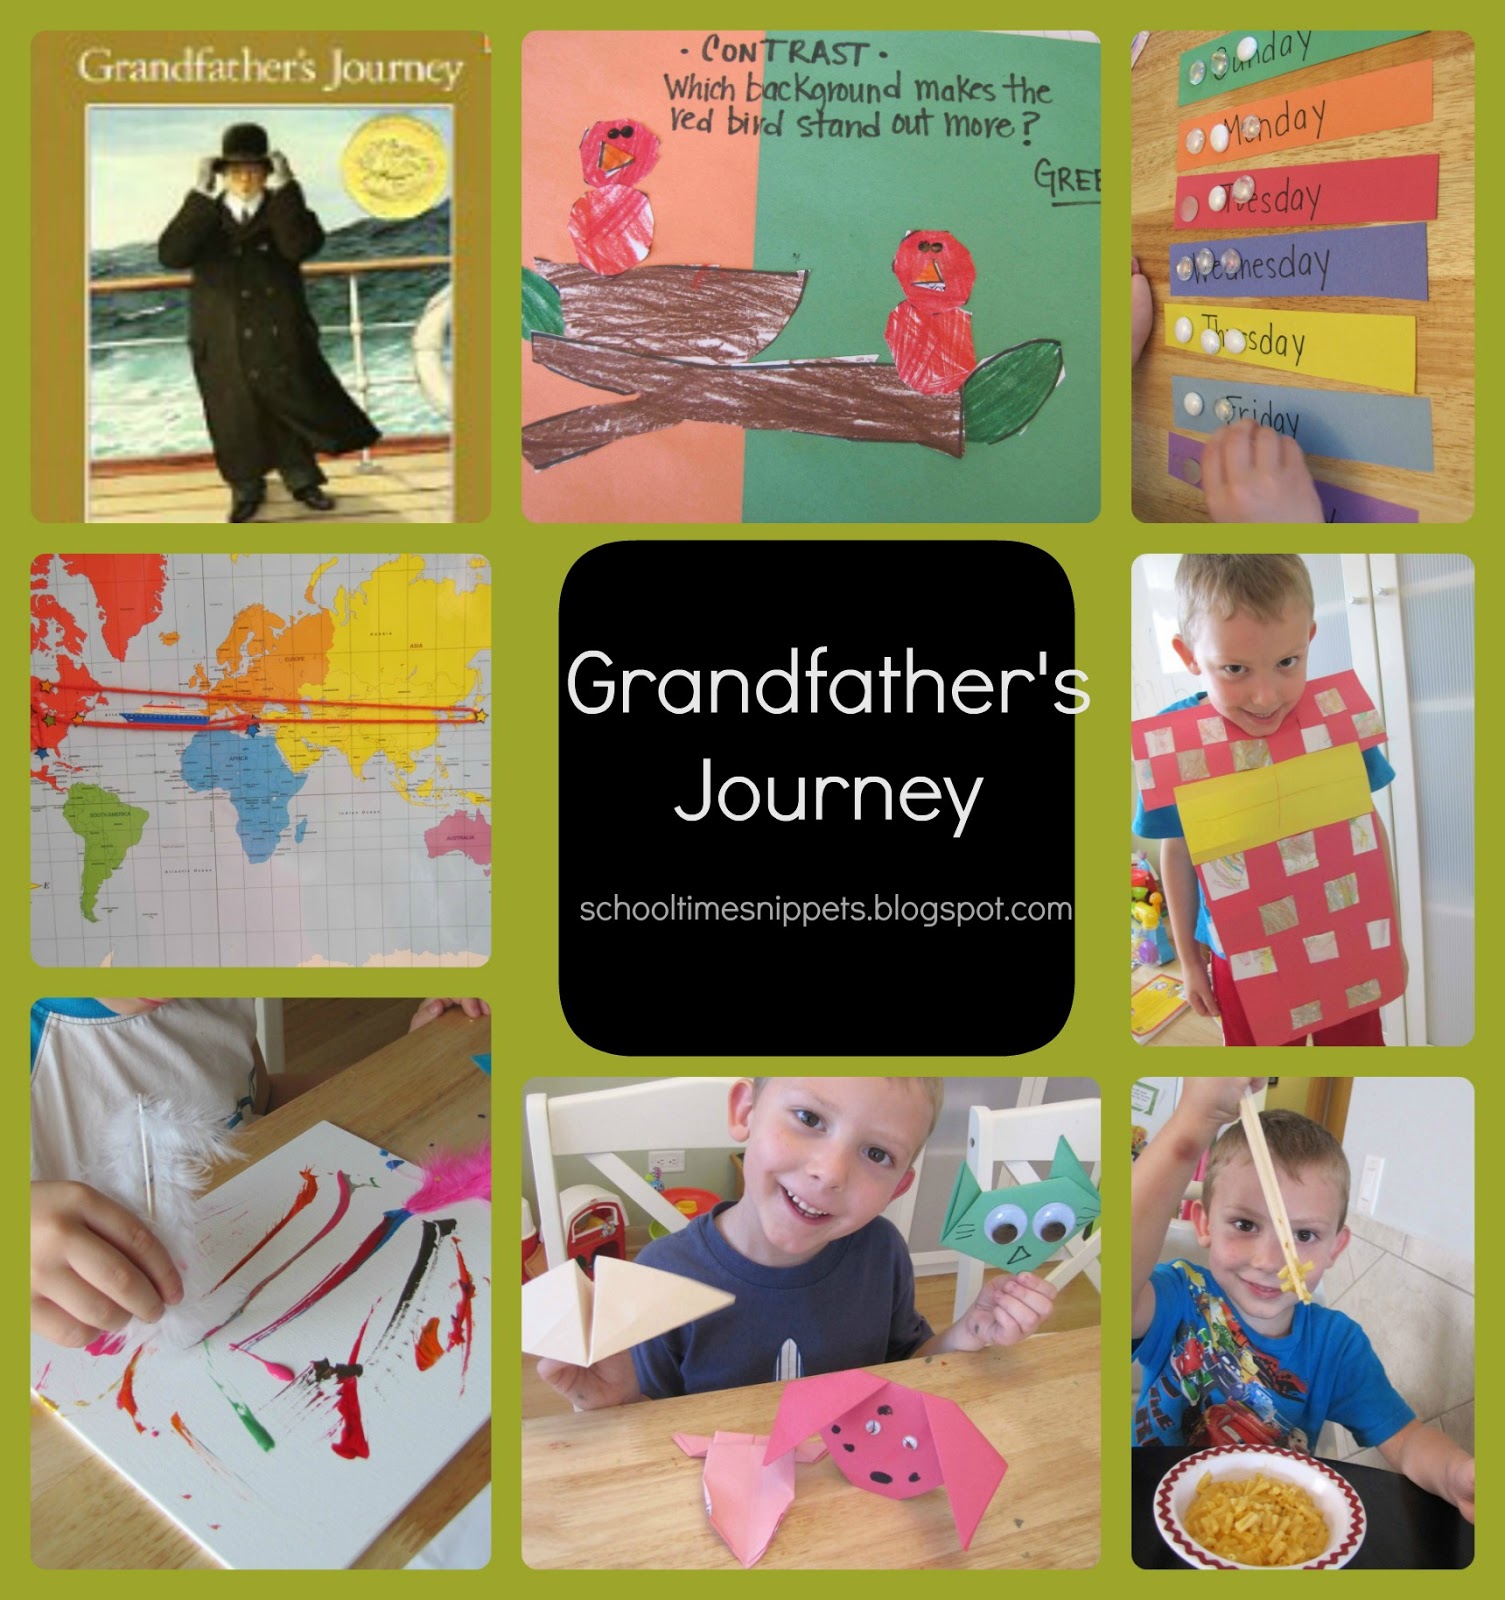 grandfather's journey reading comprehension questions